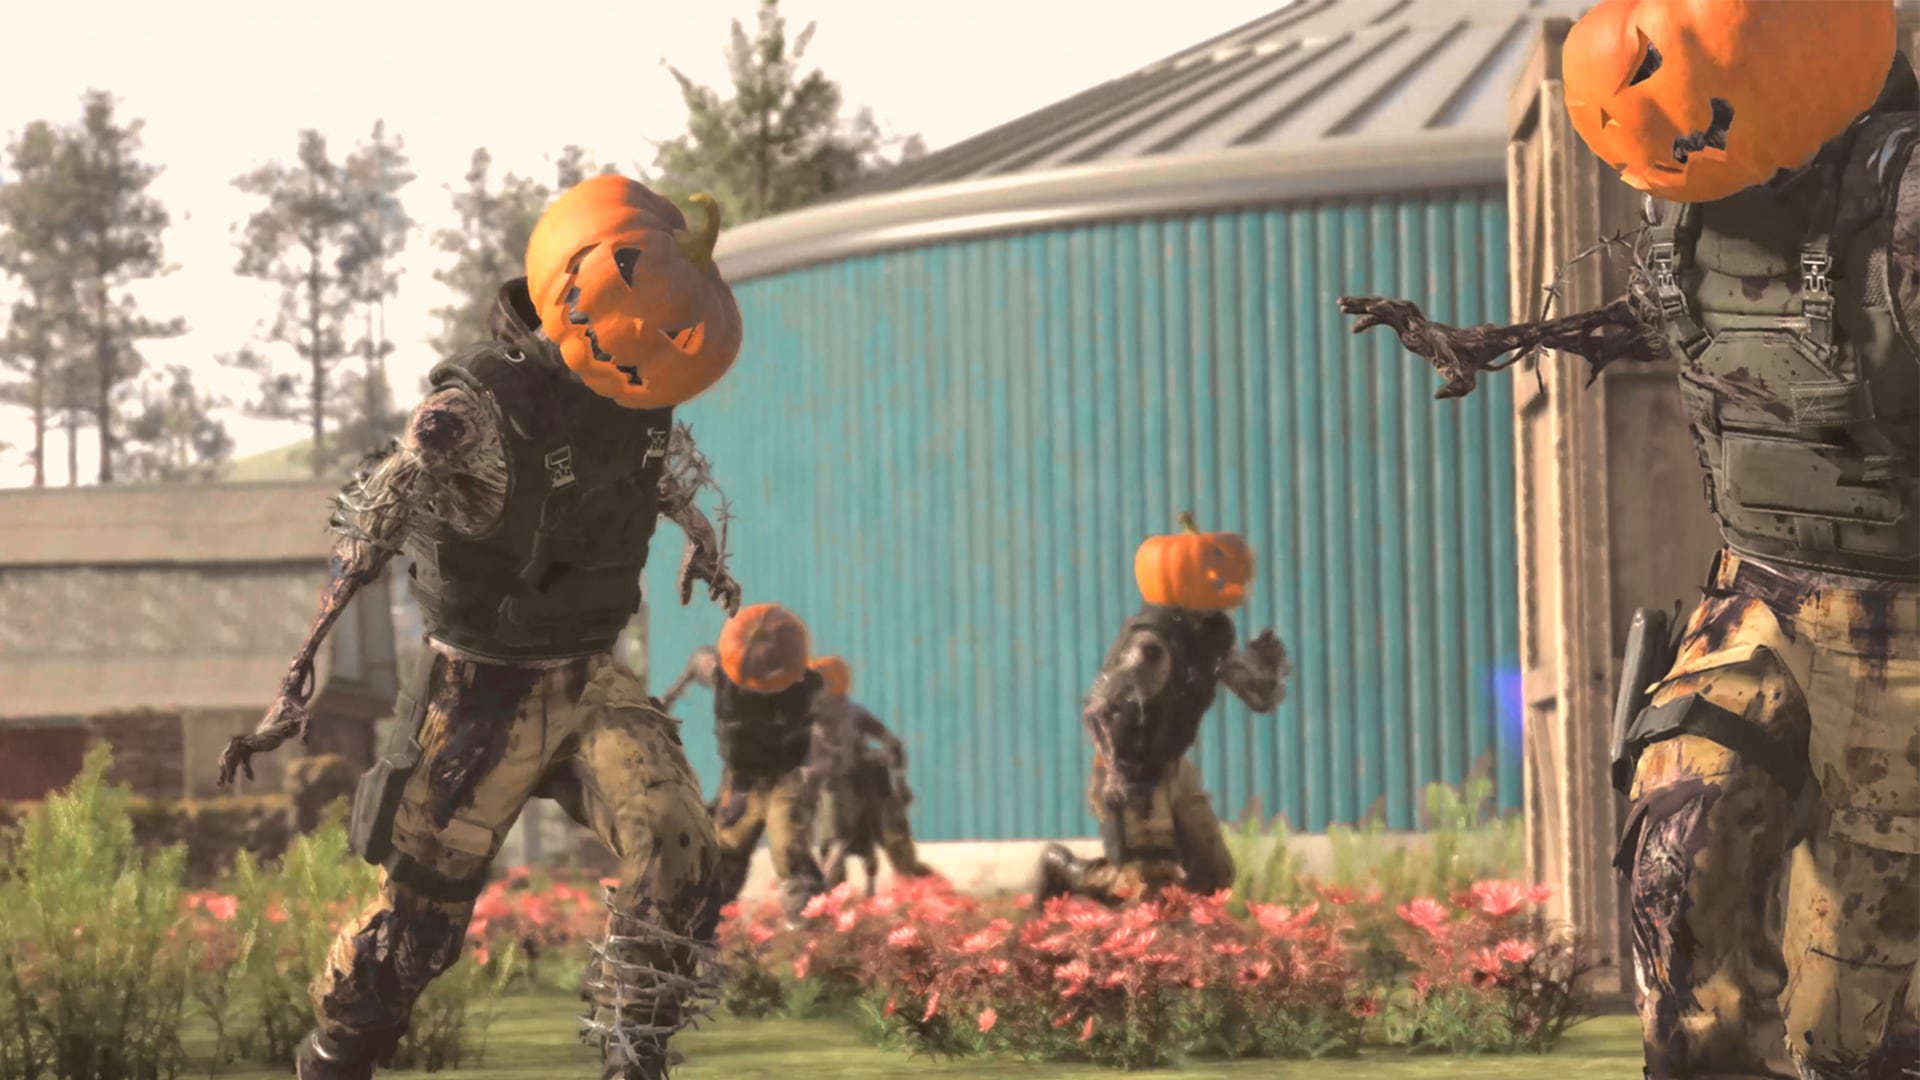 Explore Hallow's Eve in Zombies Outbreak